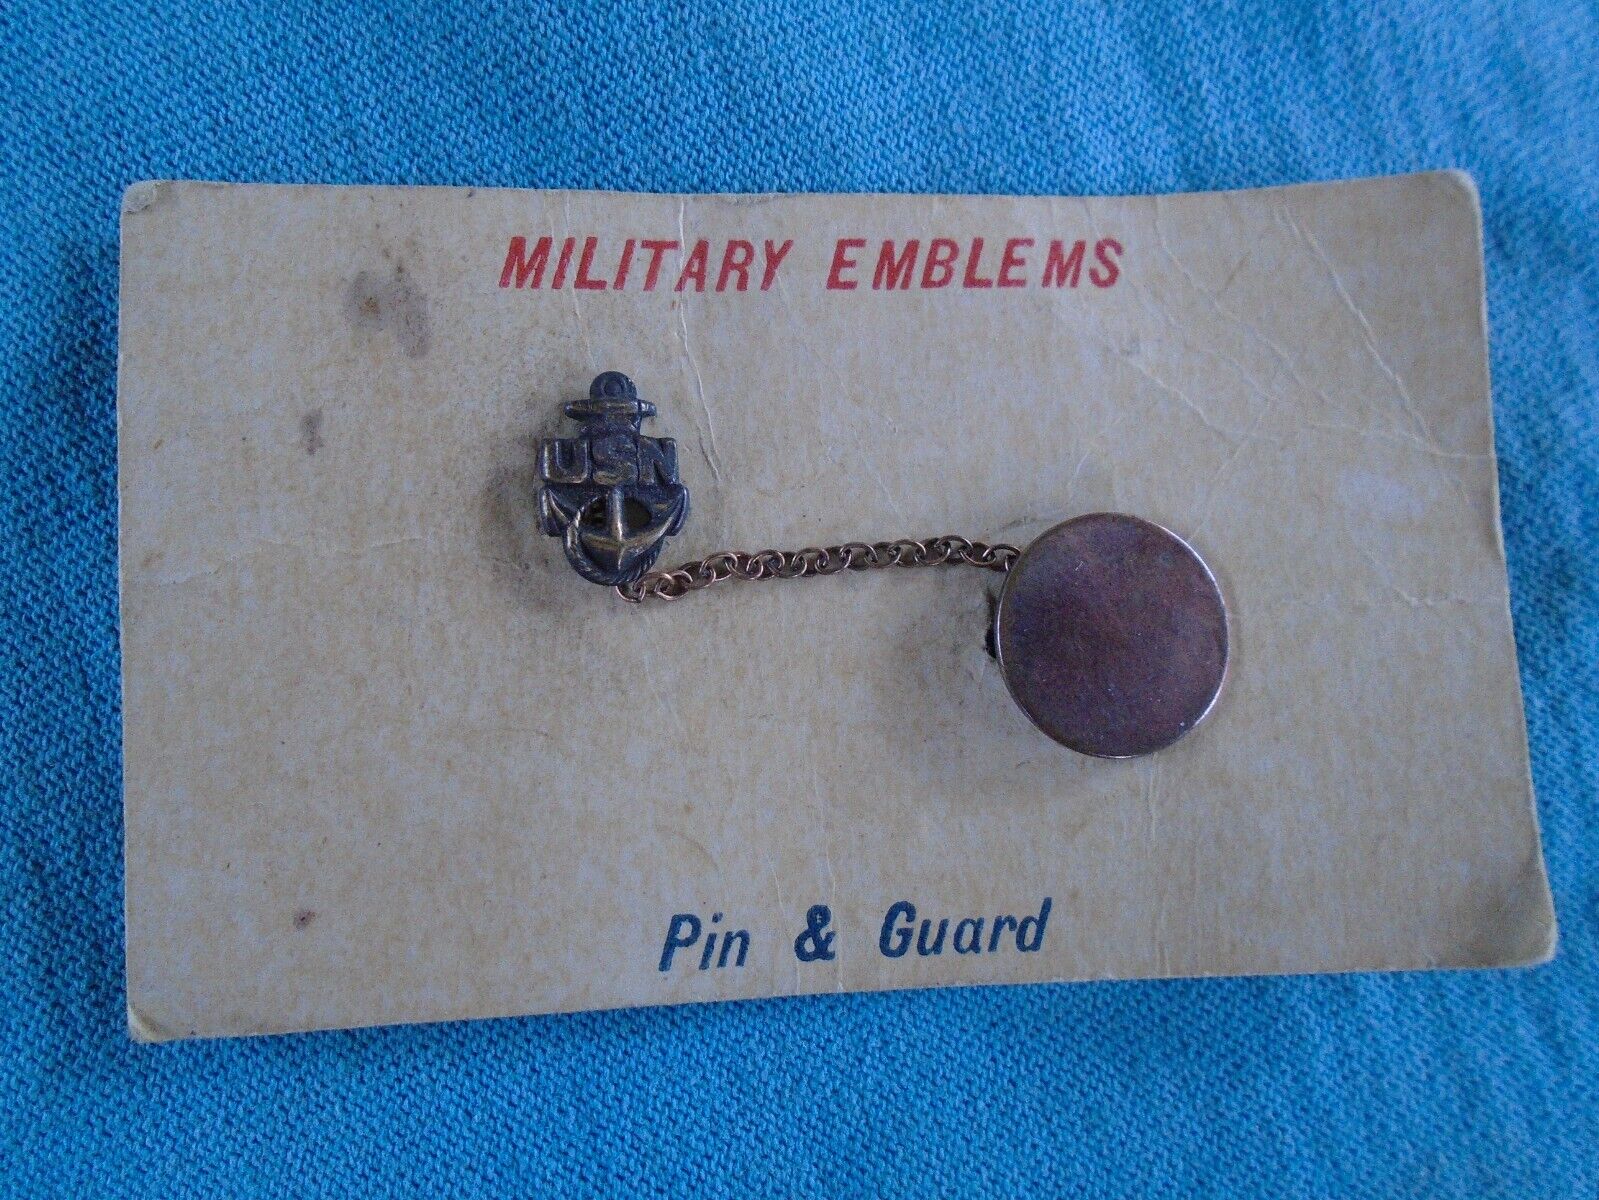 WWII sweet heart jewelry, military emblems card with Navy pin & Guard